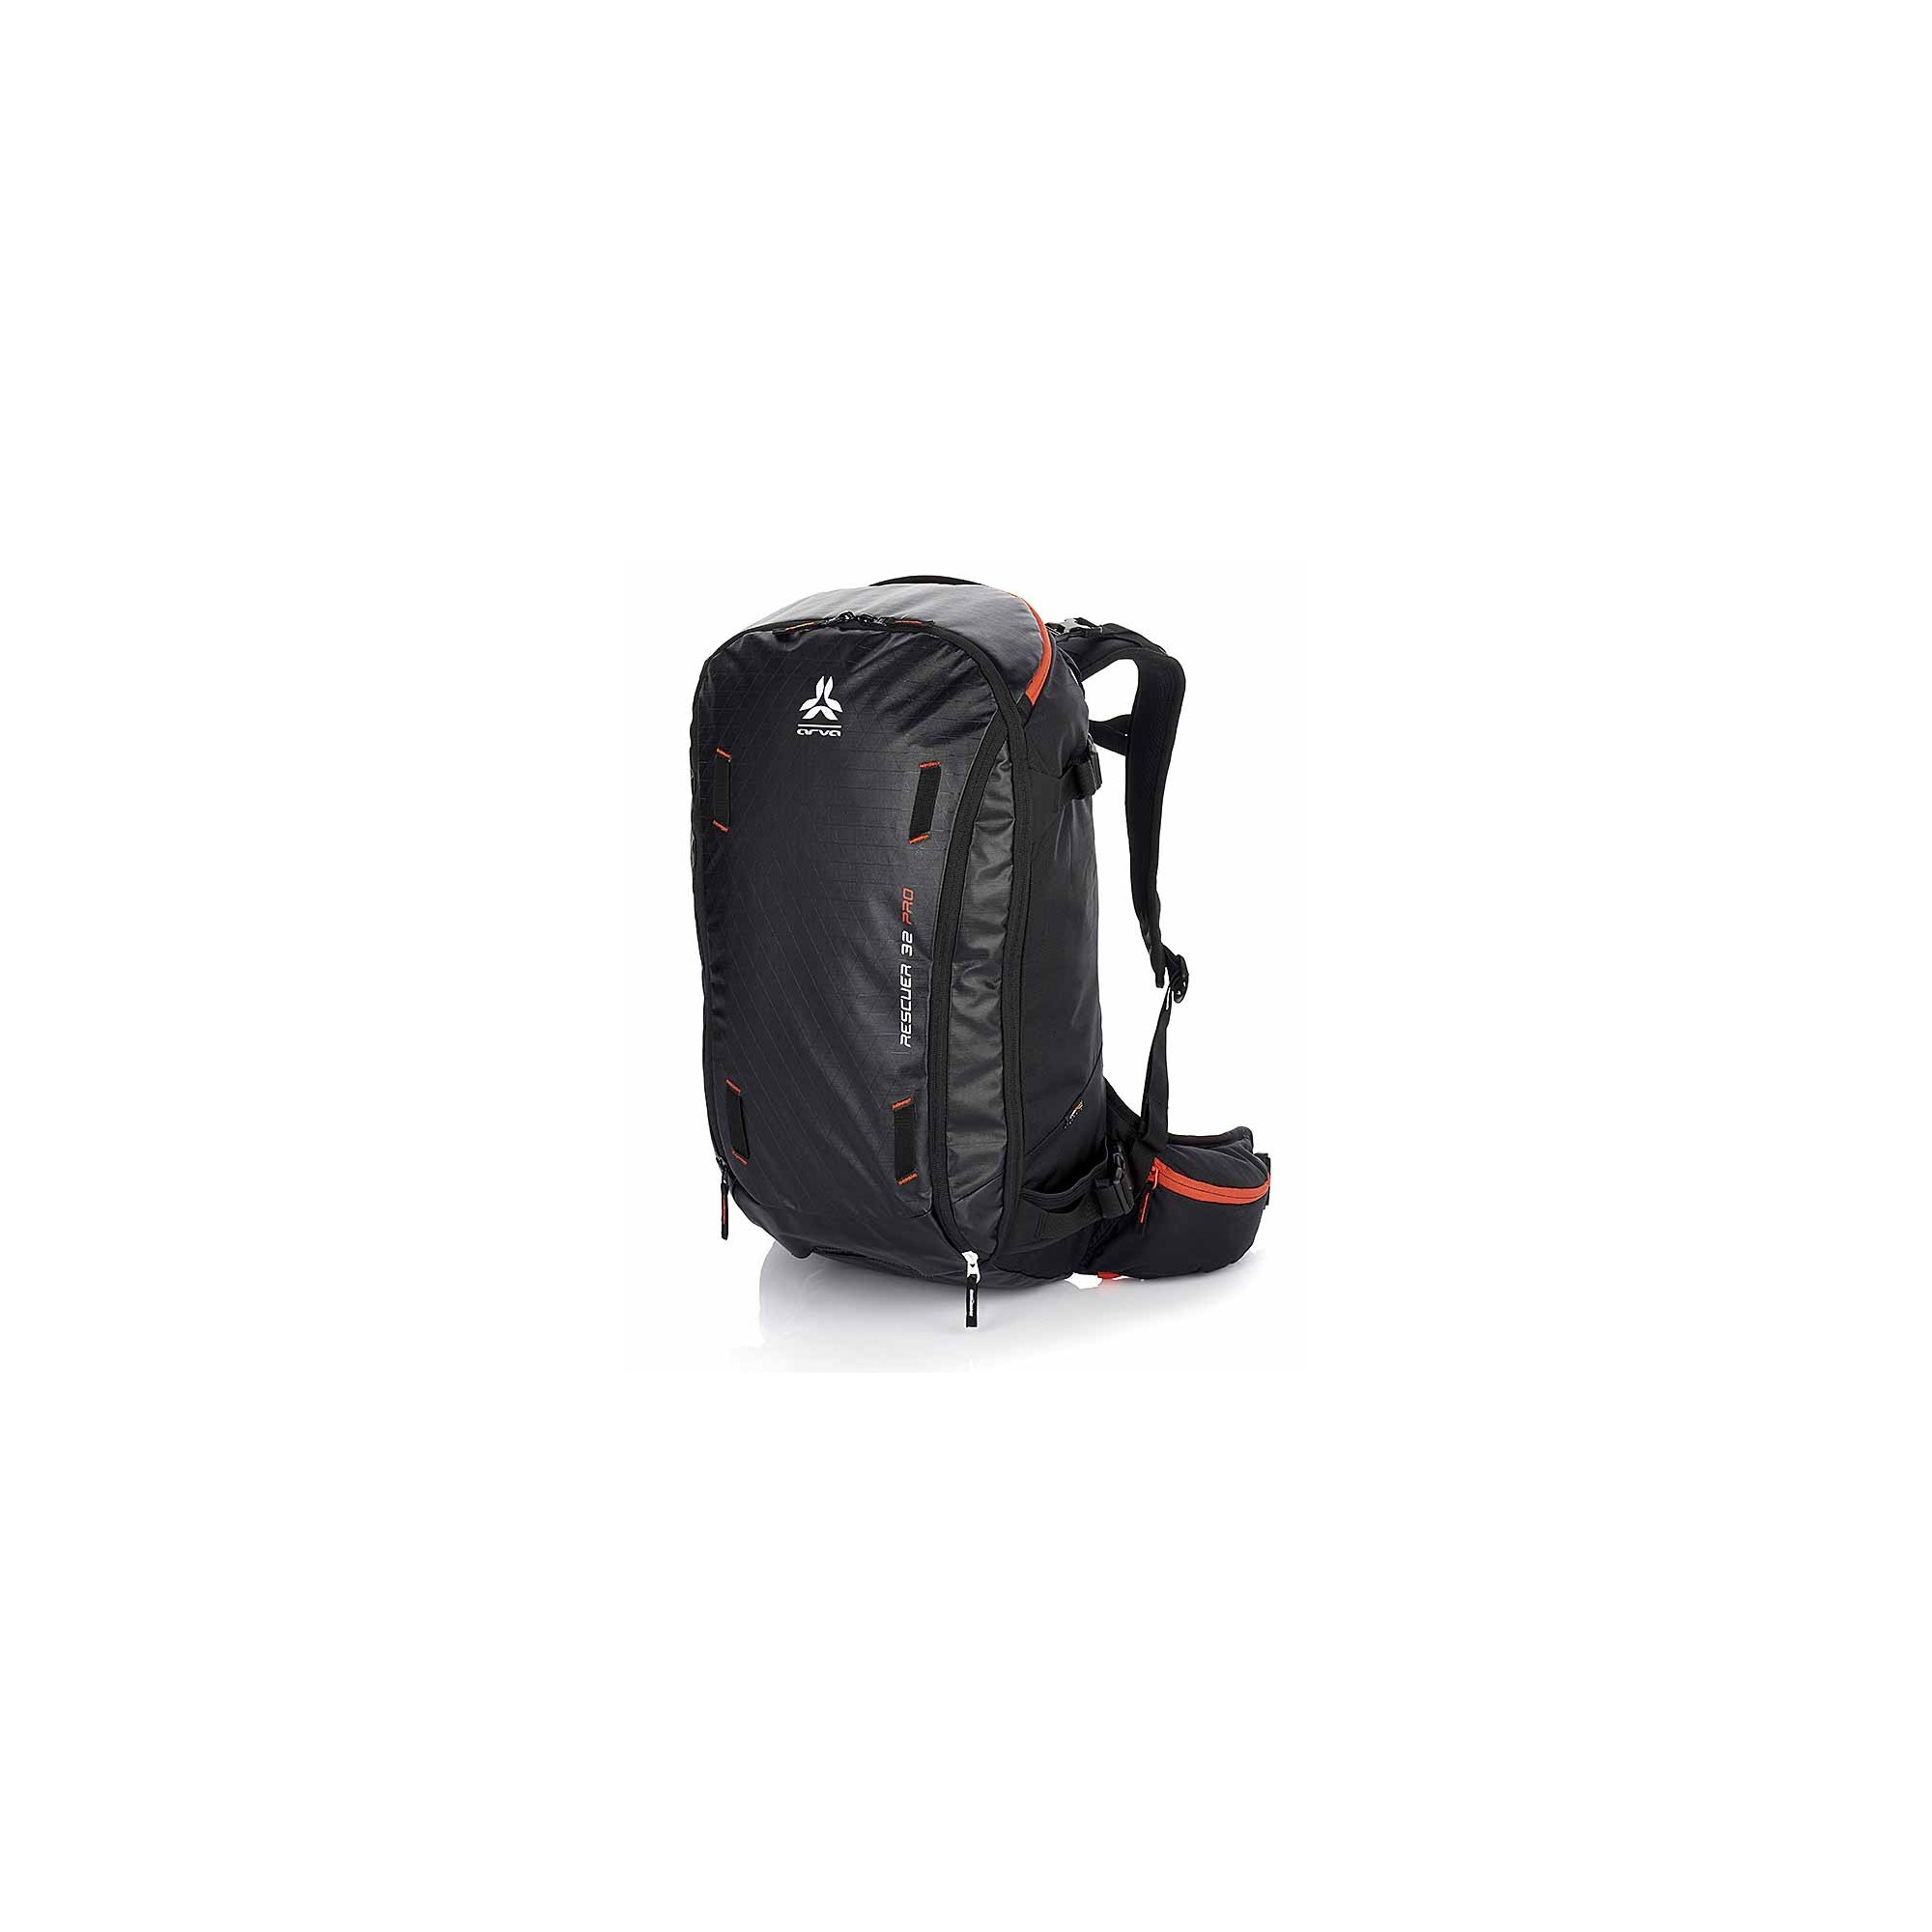 Rescuer 32 PRO ARVA backpack